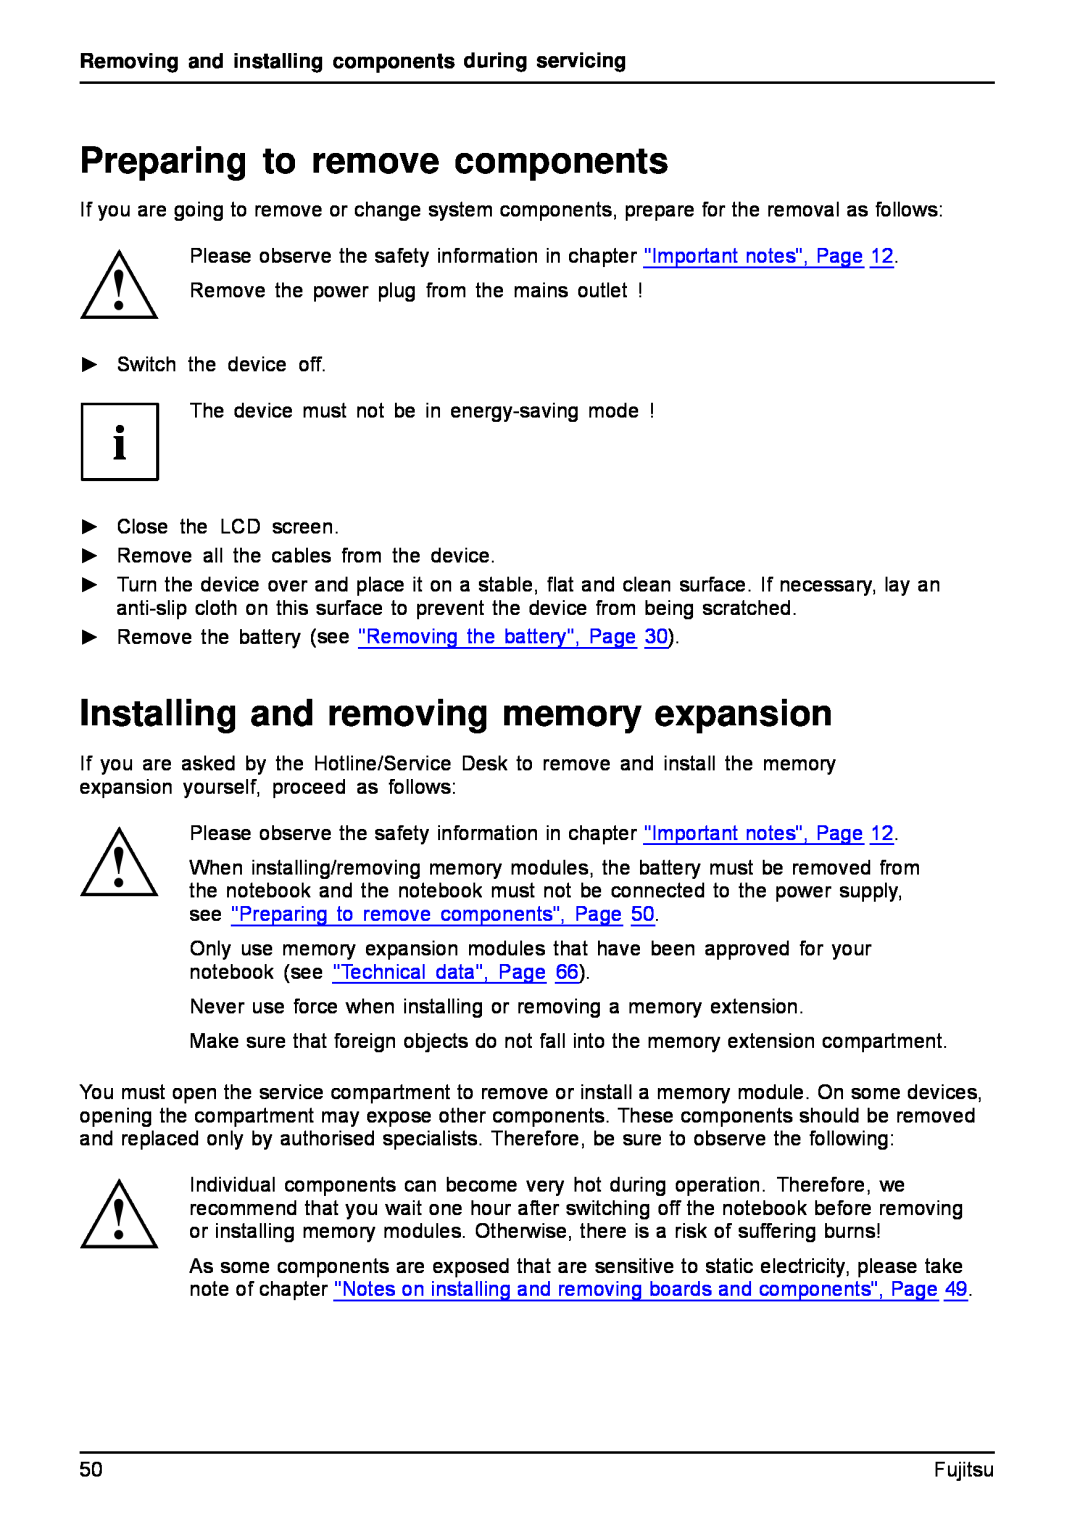 Fujitsu AH512, A512 manual Preparing to remove components, Installing and removing memory expansion 